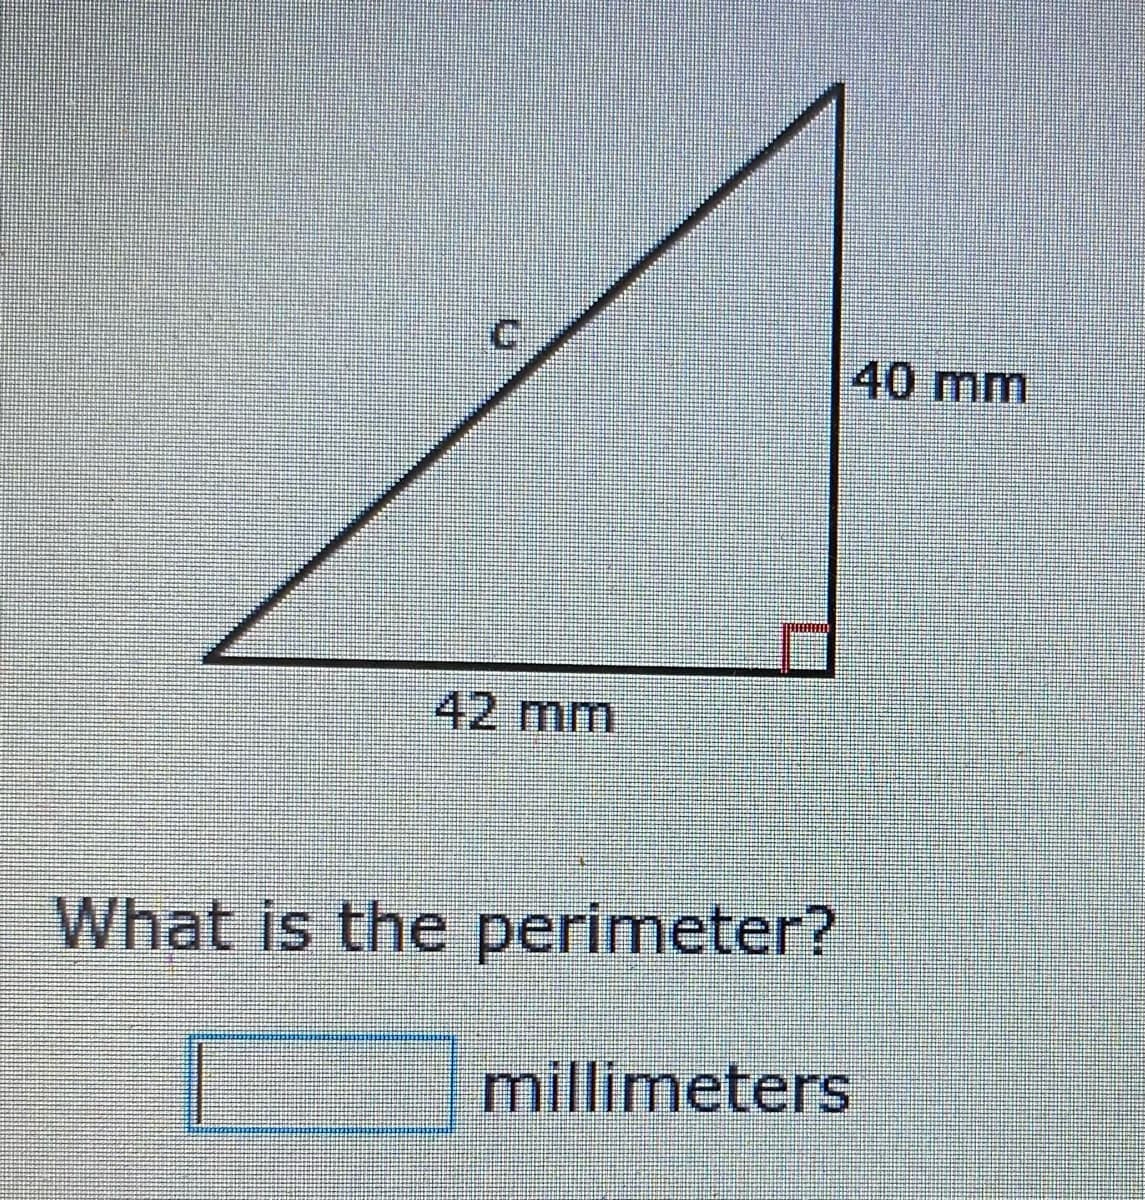 40mm
42 mm
What is the perimeter?
millimeters
